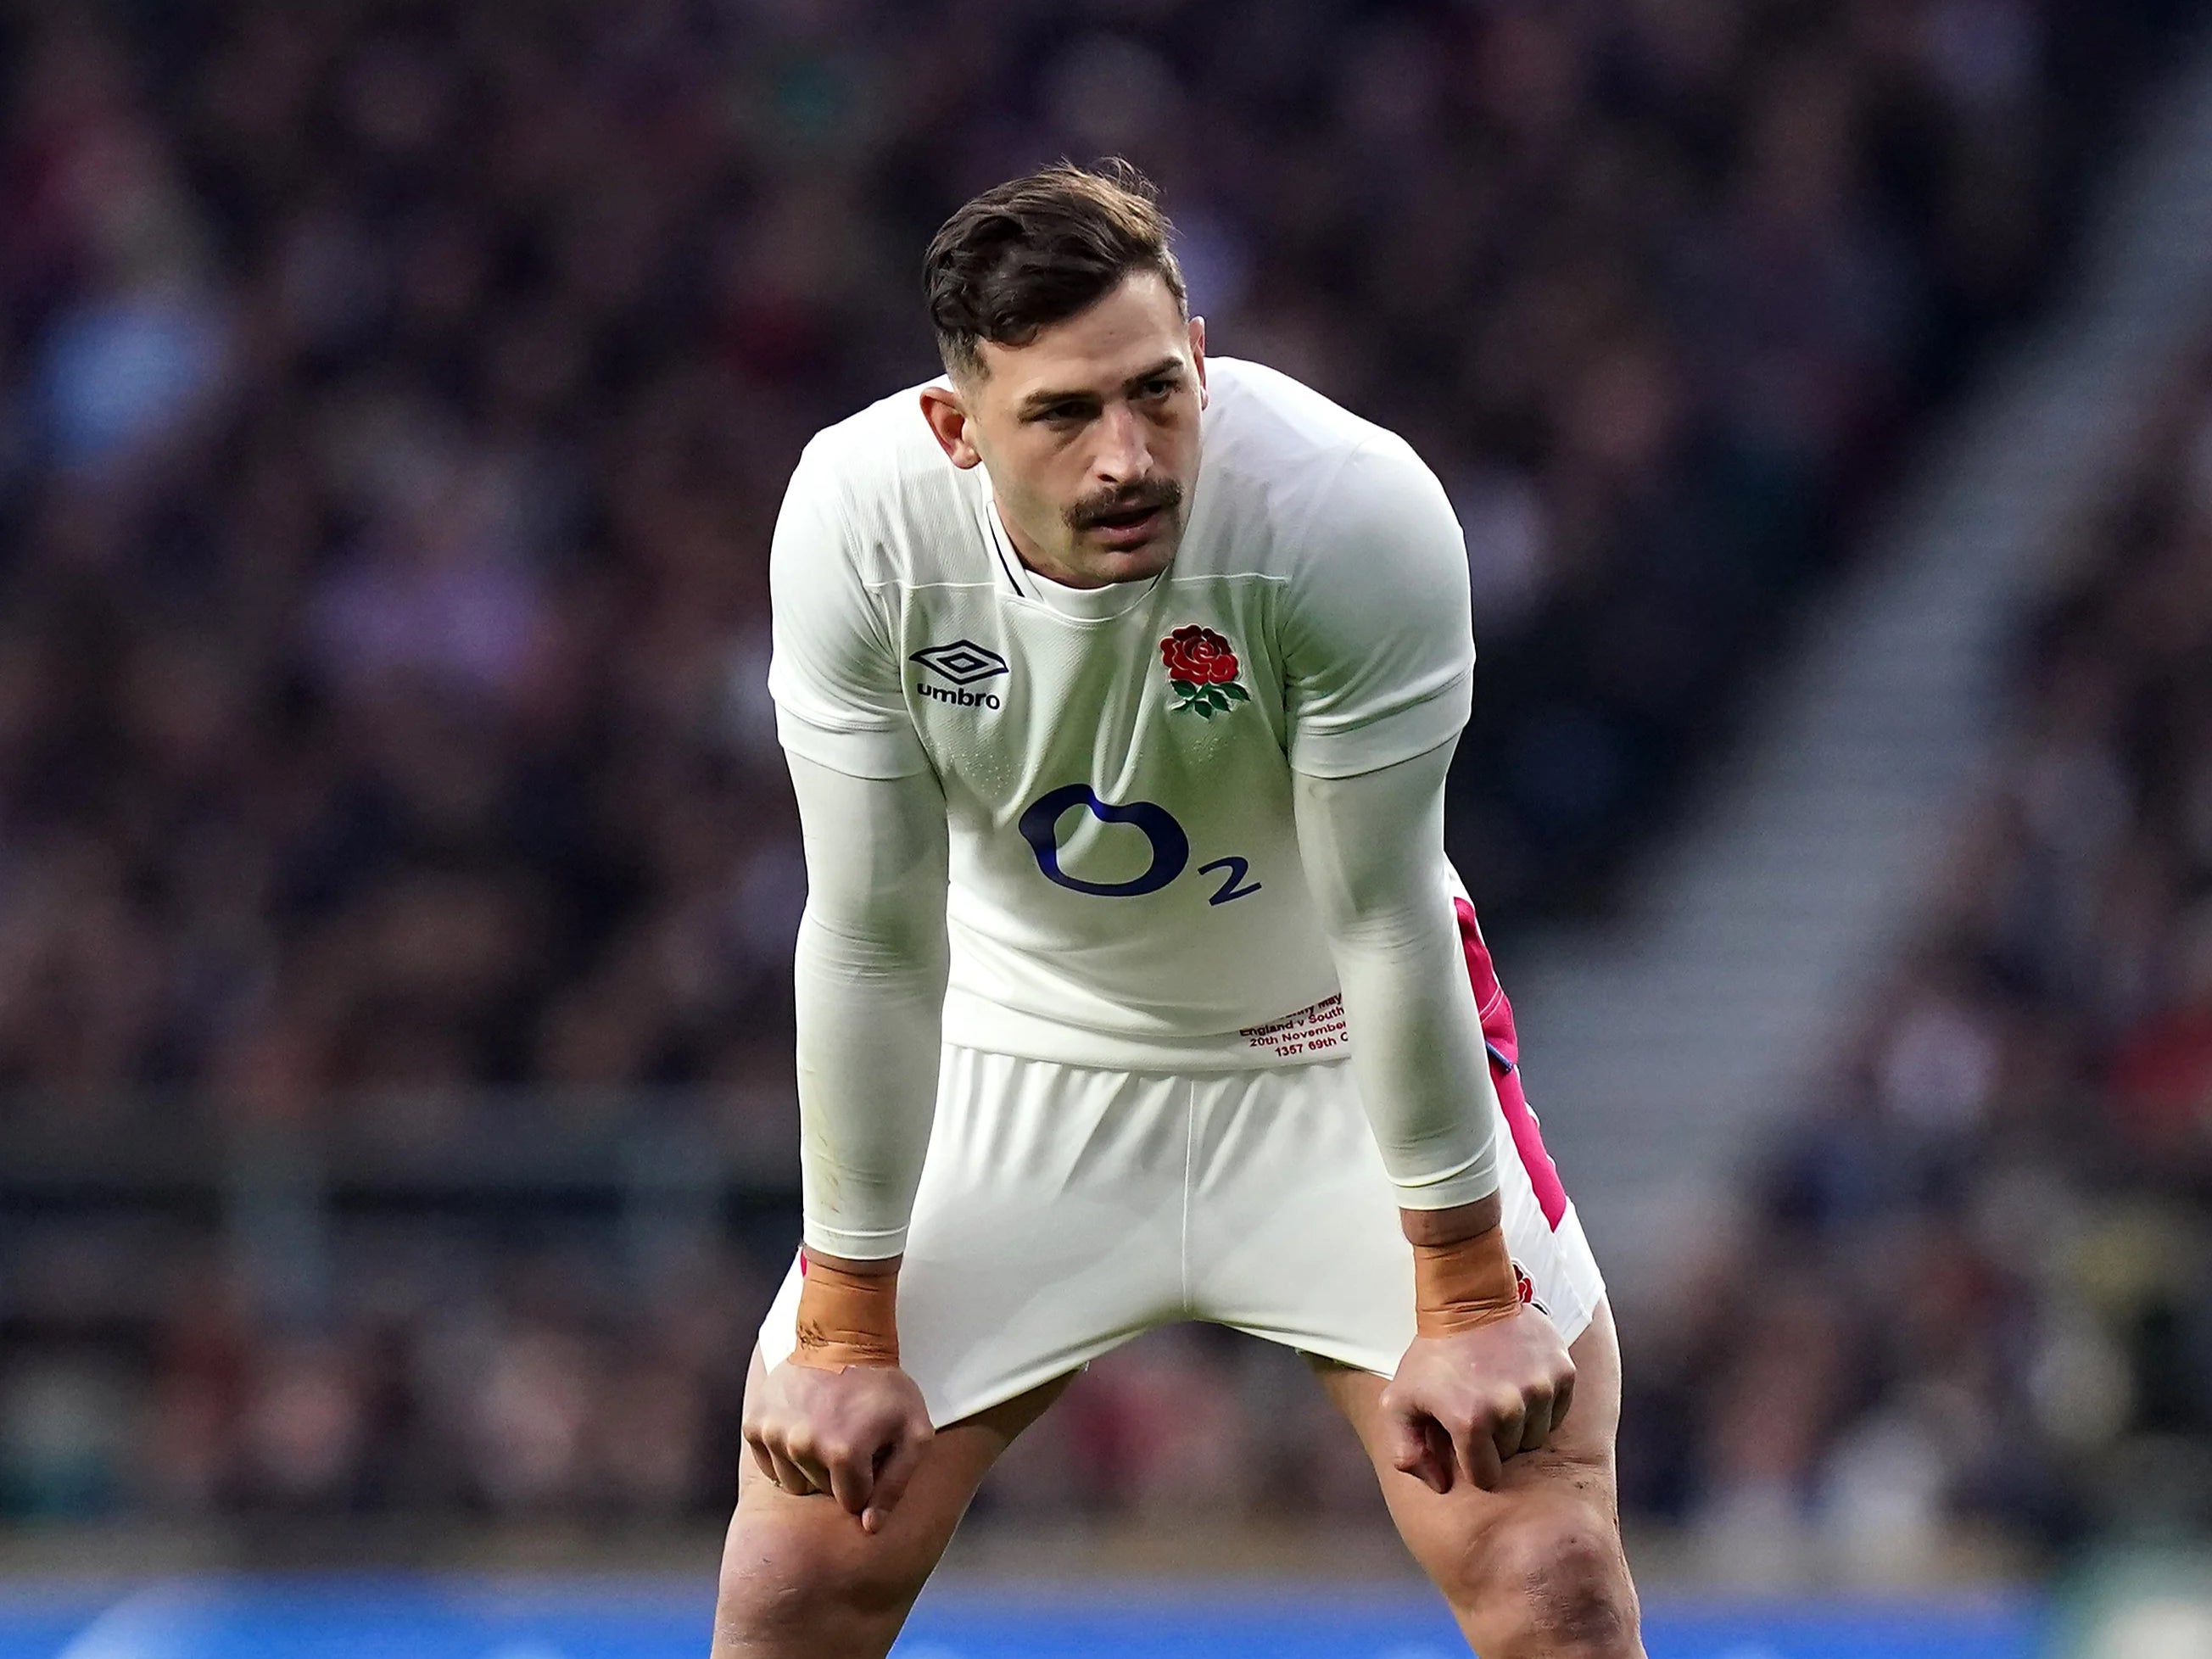 Jonny May was unable to play in any of the Tests against Australia because of Covid